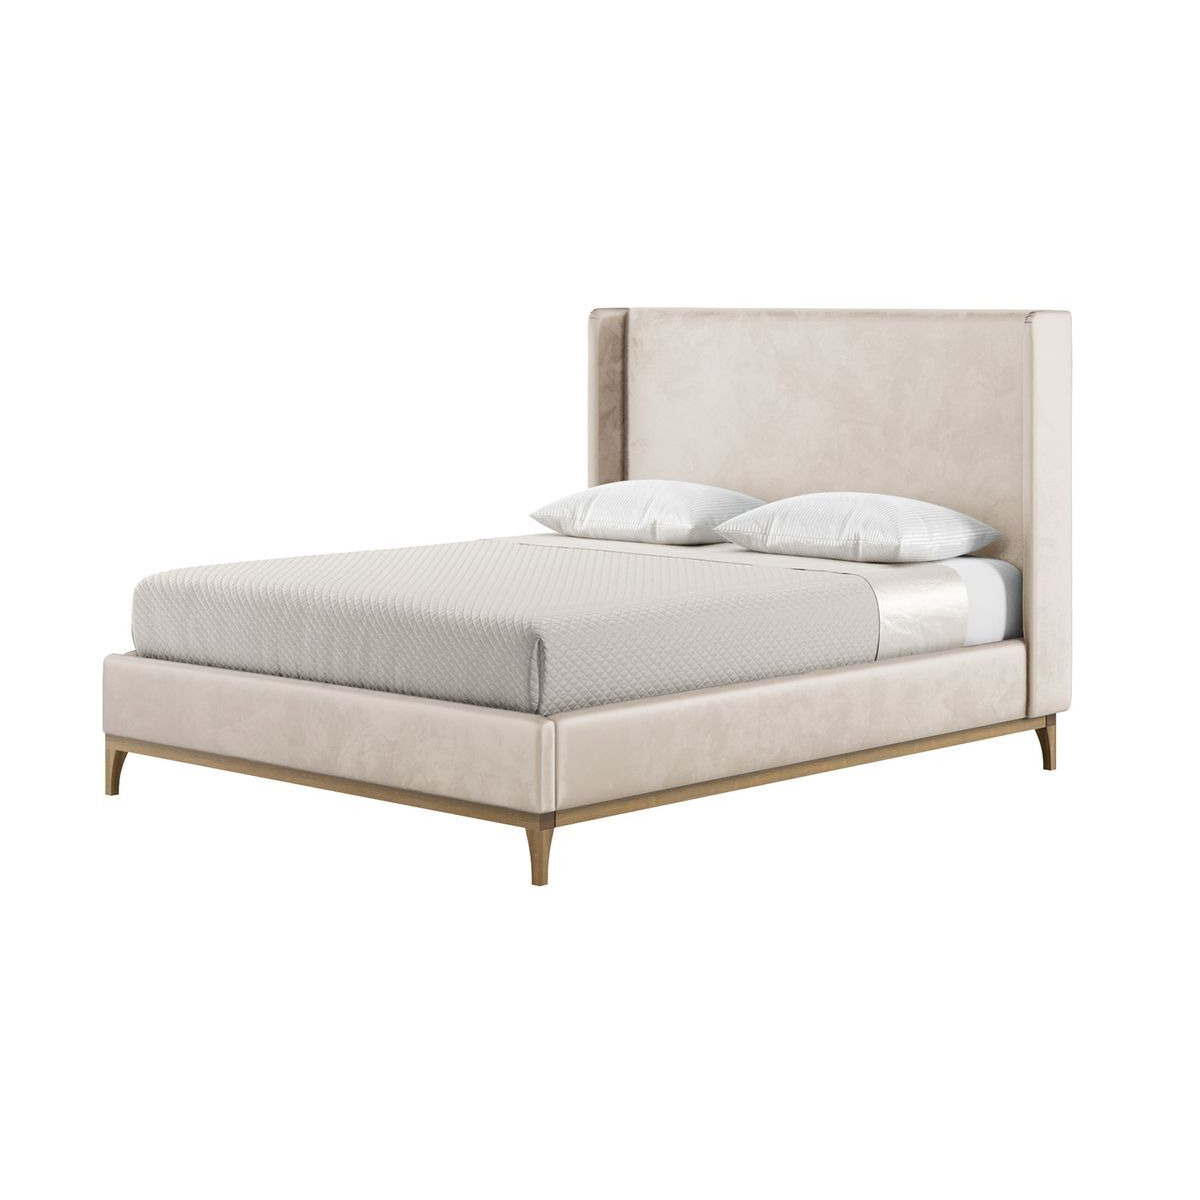 Diane 5ft King Size Bed Frame with modern smooth wing headboard, light beige, Leg colour: wax black - image 1